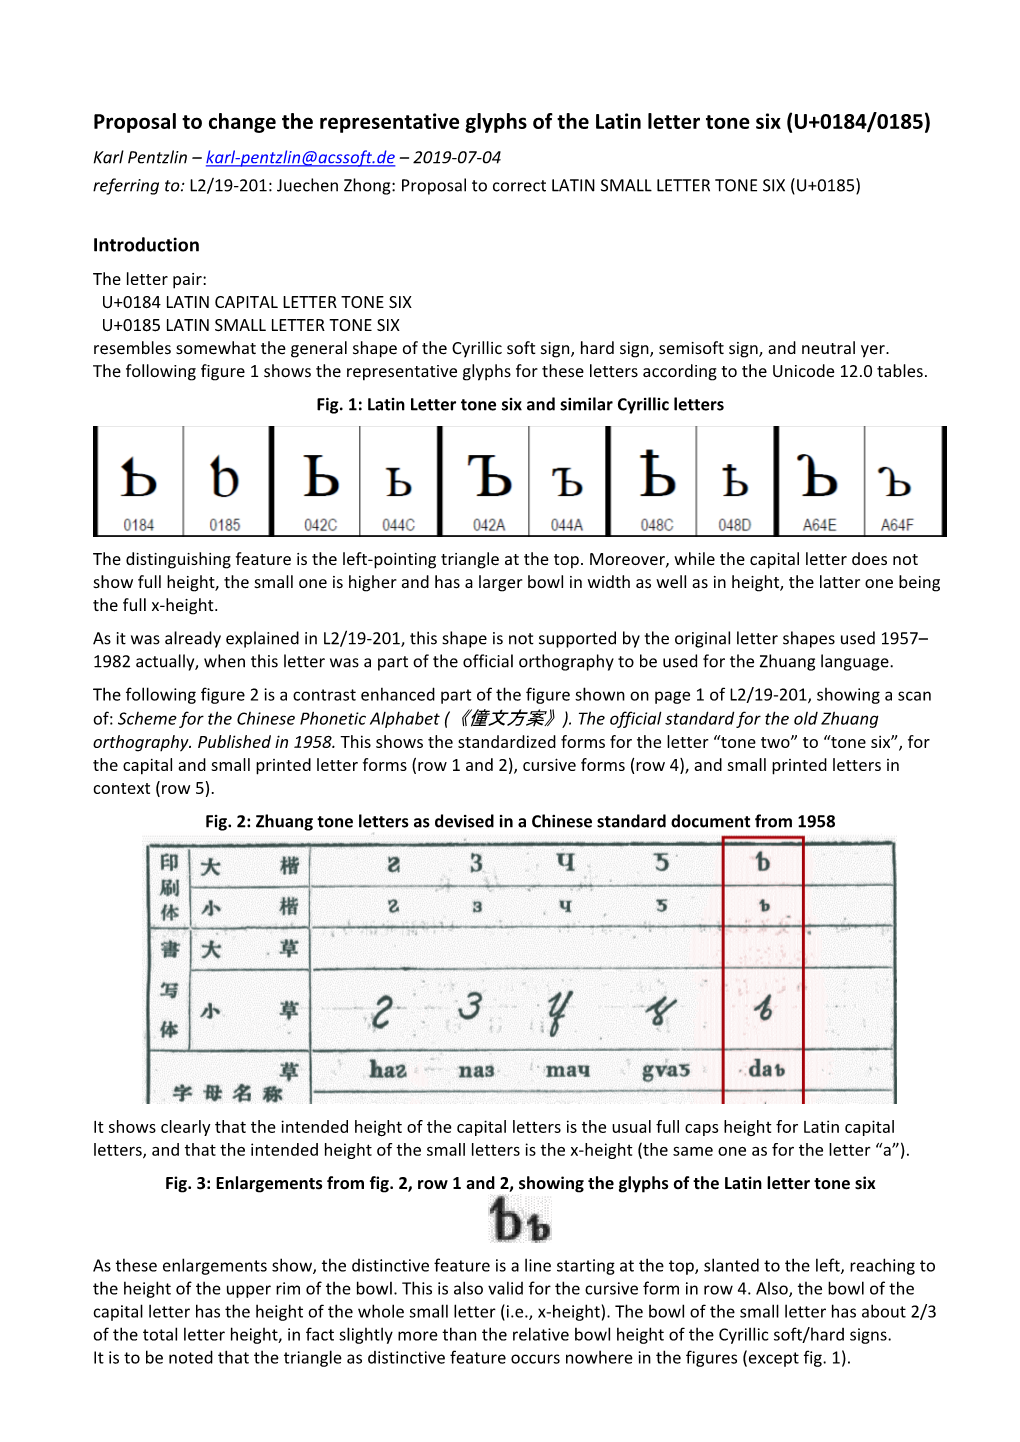 Proposal to Change the Representative Glyphs of the Latin Letter Tone